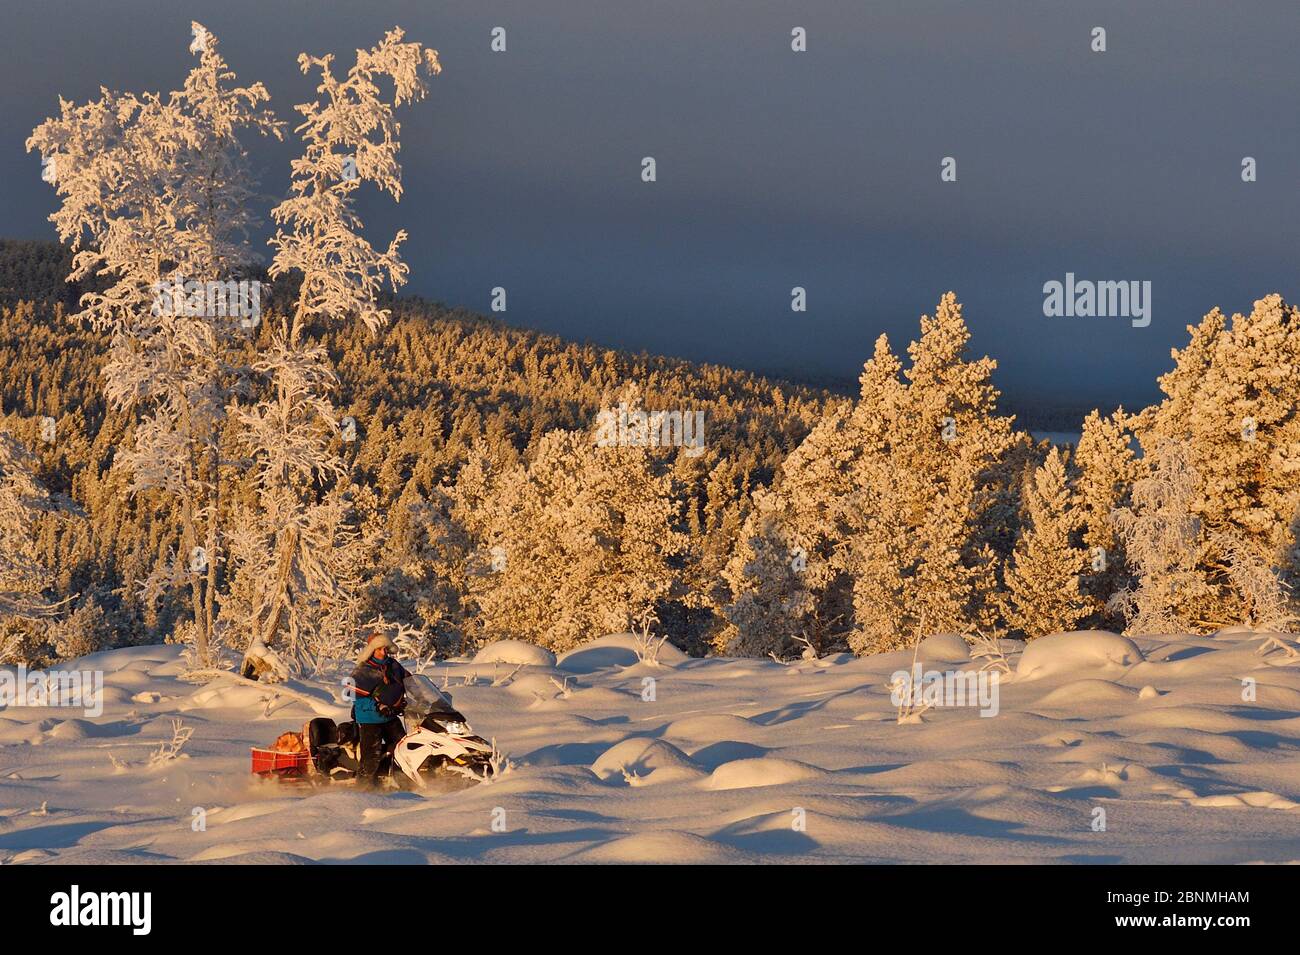 Nils-Torbjorn Nutti, owner and operator at Nutti Sami Siida, on snowmobile trip into the wilderness, Jukkasjarvi, Lapland, Laponia, Norrbotten county, Stock Photo